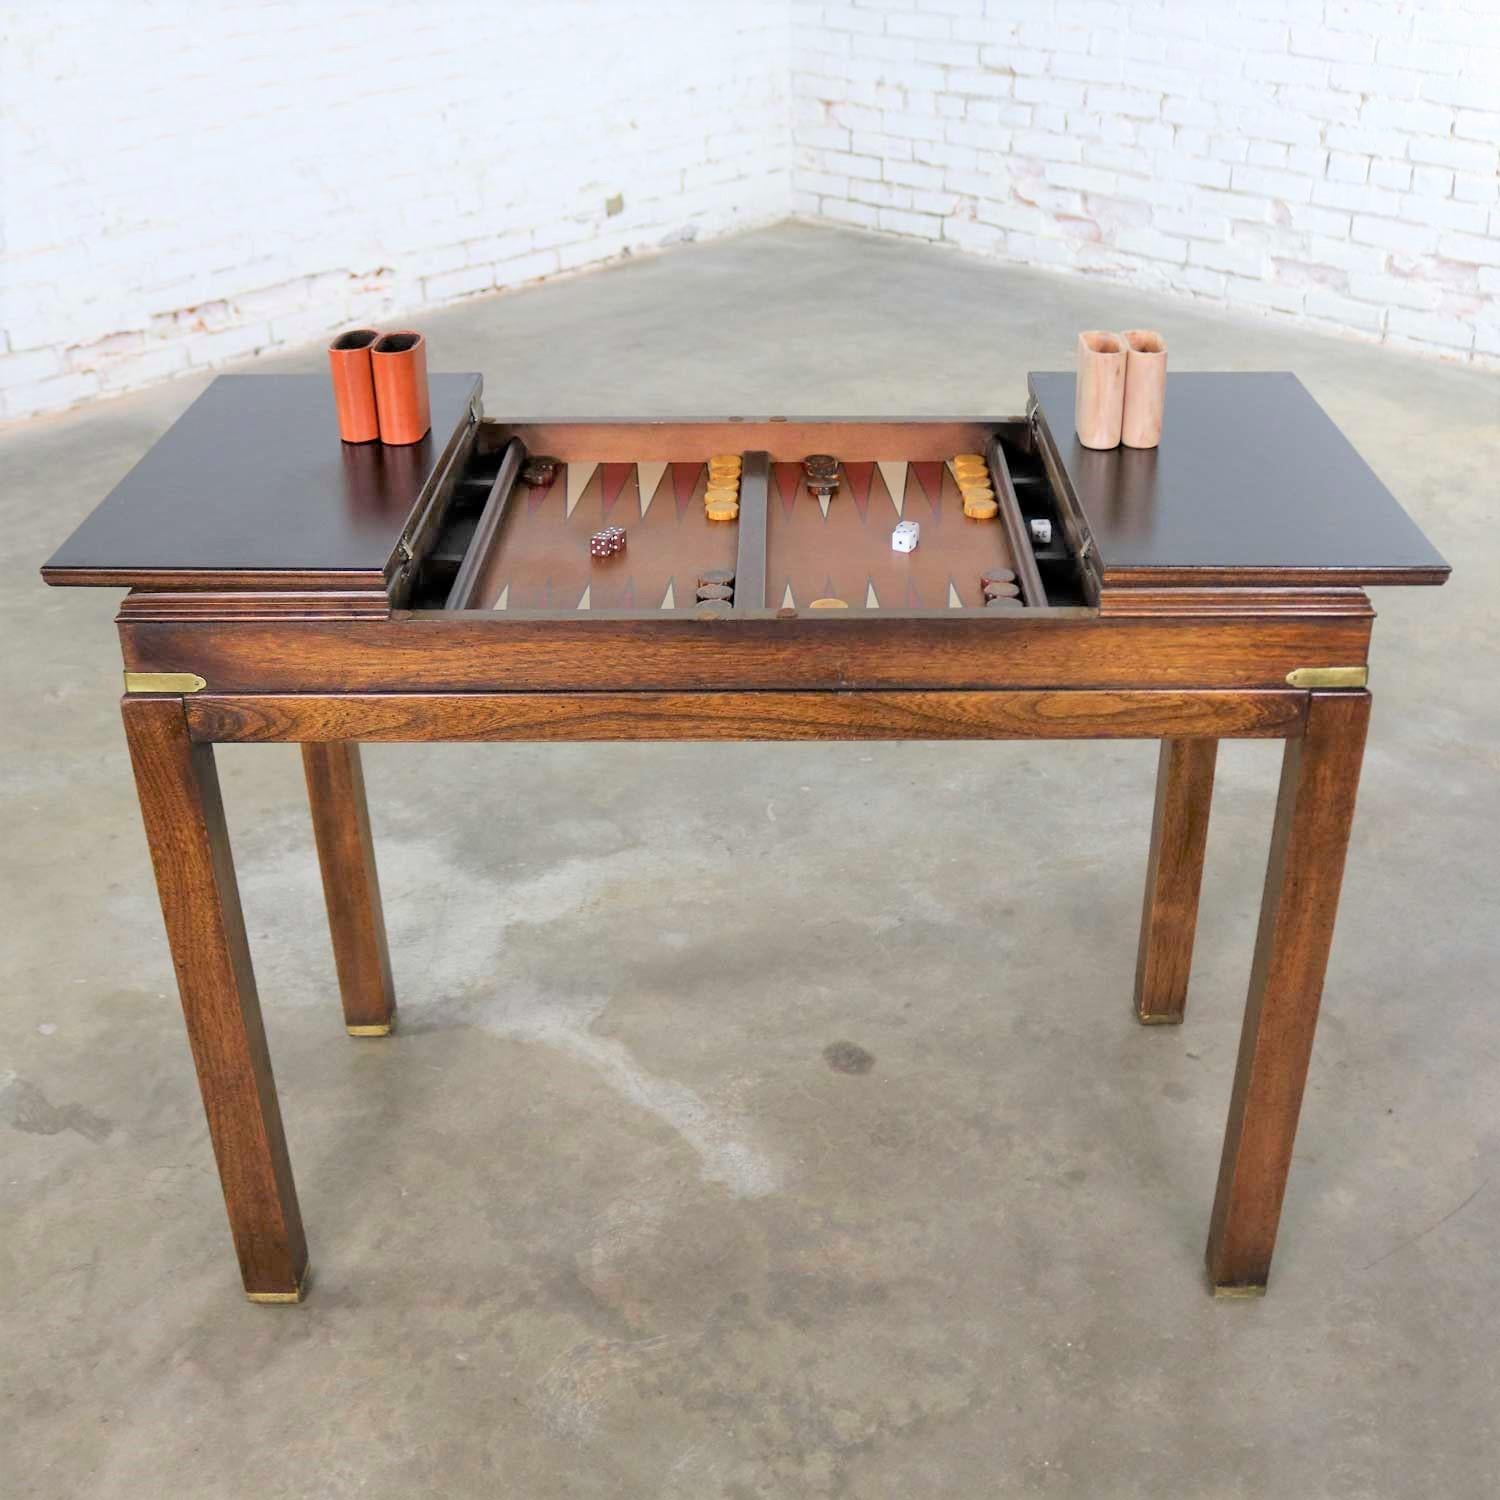 Handsome Campaign style combination console table, sofa table, backgammon game table with flip open top by Lane Furniture. Its style number is 920 62 and it is in wonderful vintage condition with no outstanding flaws. Marked on the bottom with